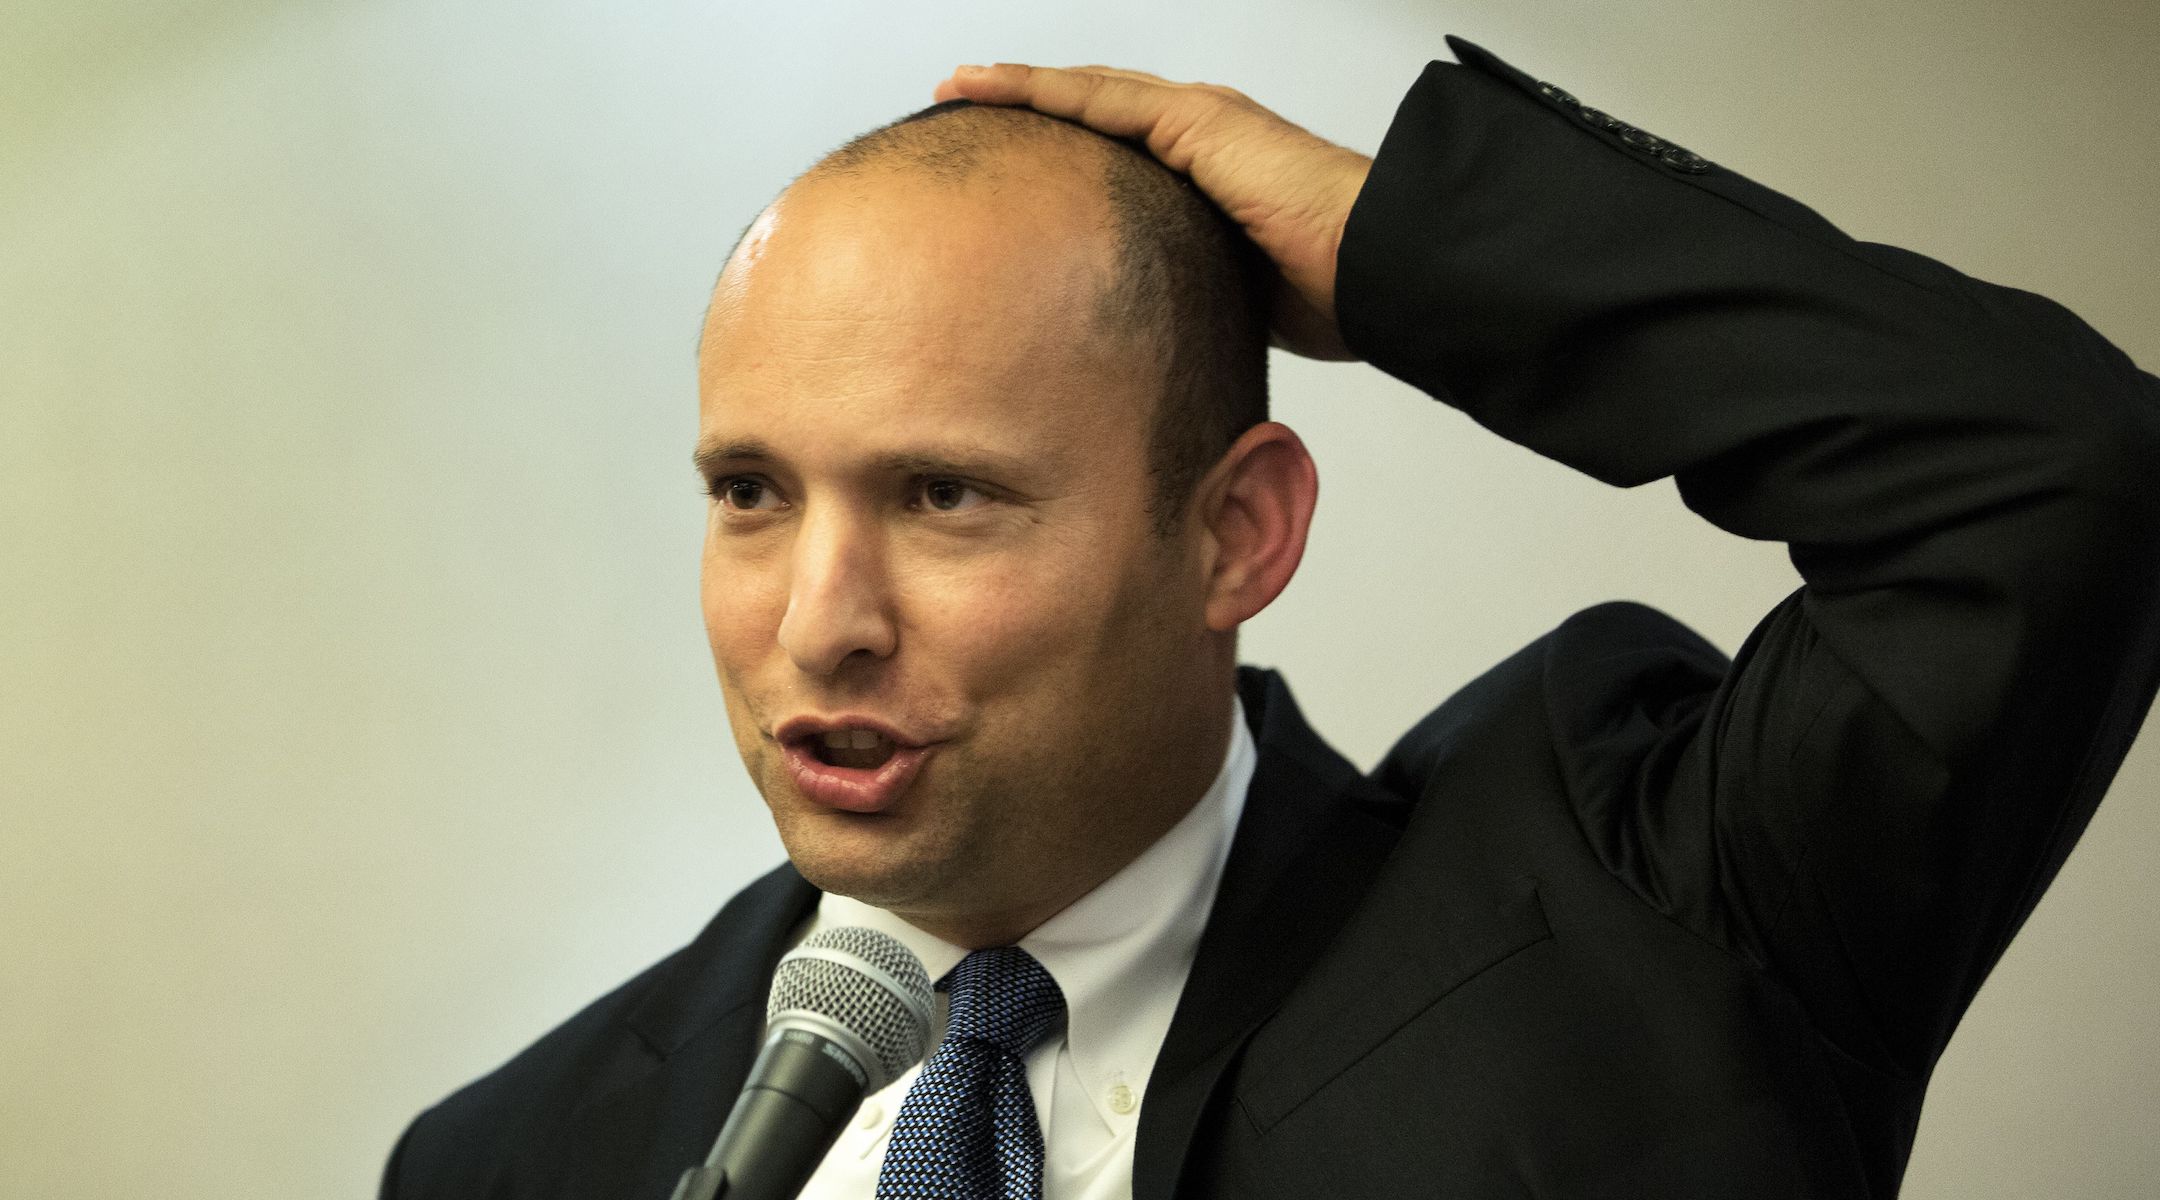 Israeli Prime Minister Naftali Bennett, pictured here in 2014 giving a speech, holds his kippah to his head. (Menahem Kahana/AFP via Getty Images)